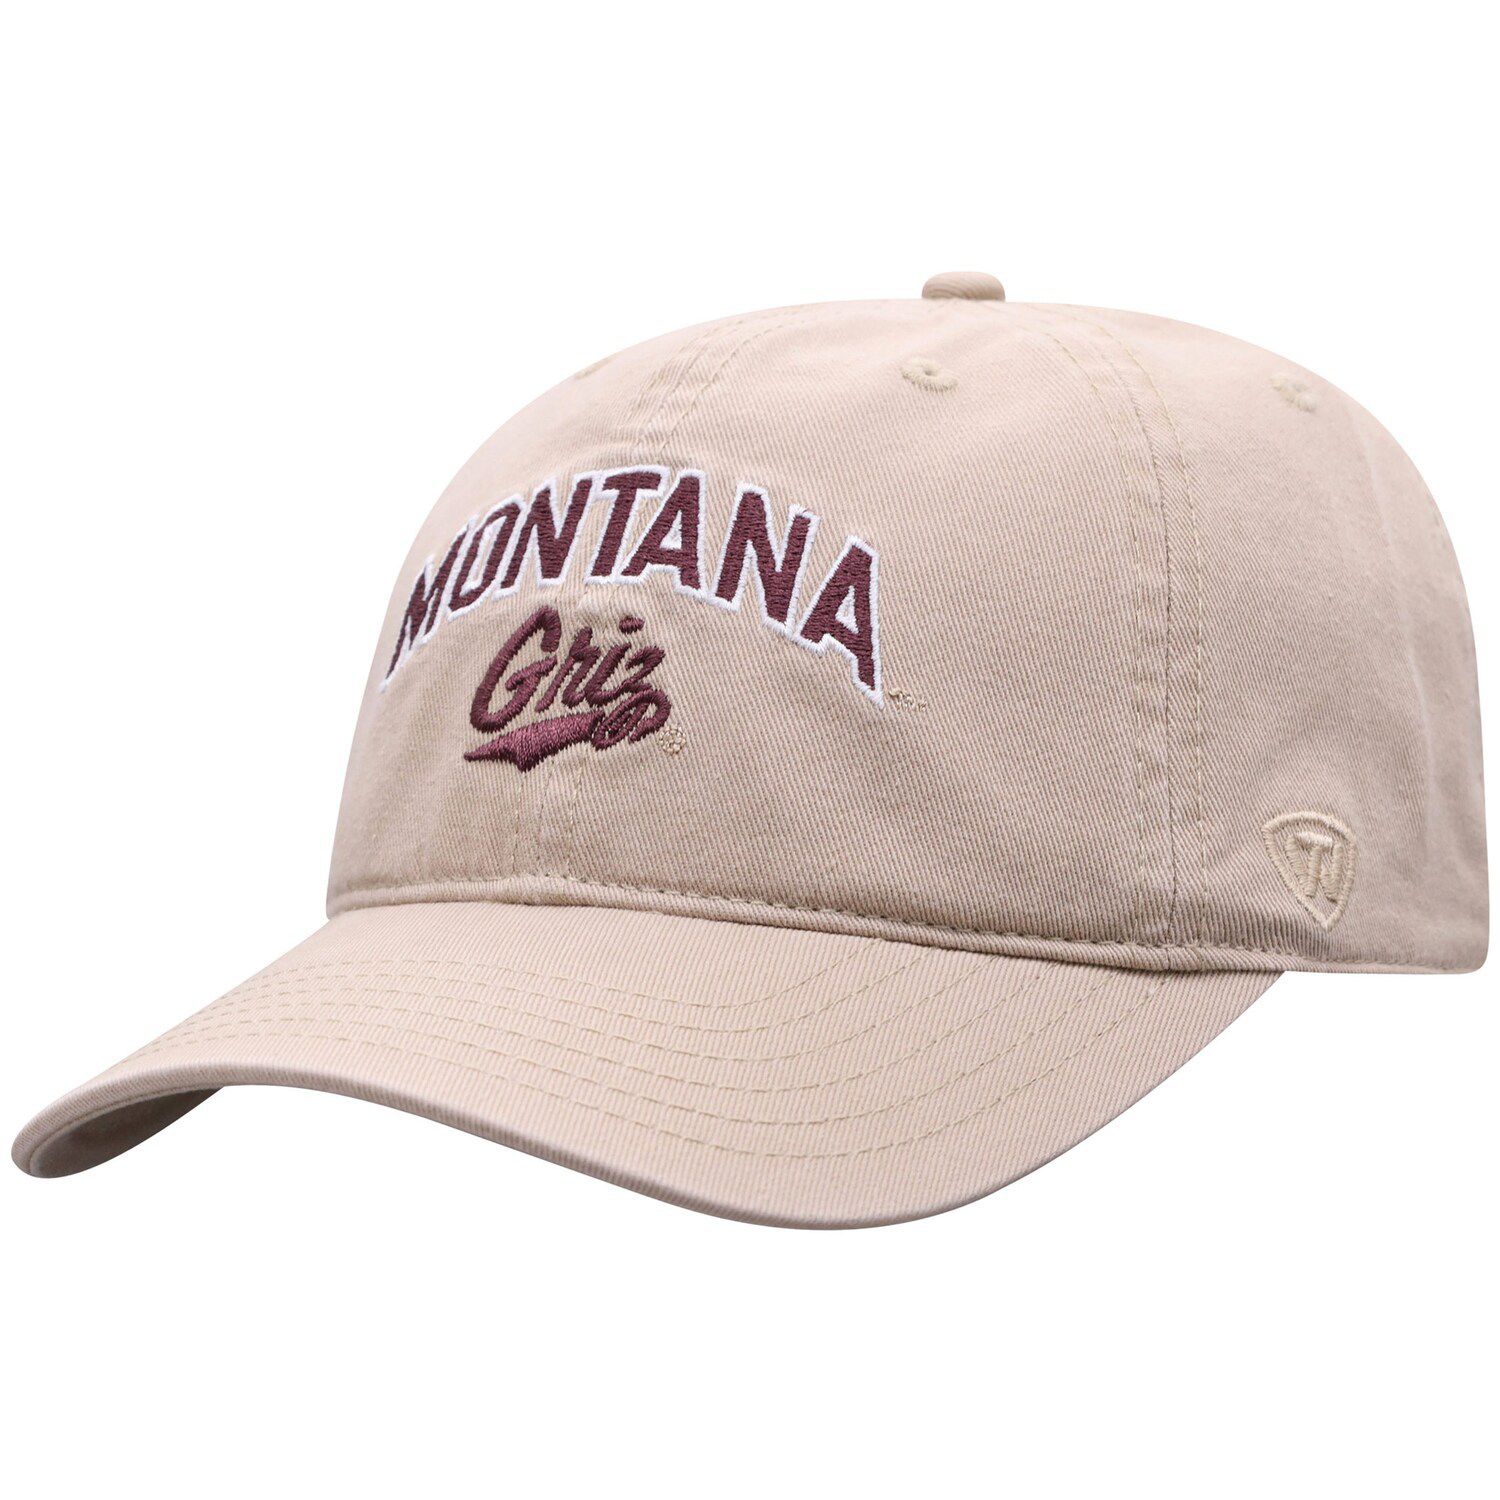 Image for Unbranded Men's Top of the World Khaki Montana Grizzlies Classic Arch Adjustable Hat at Kohl's.